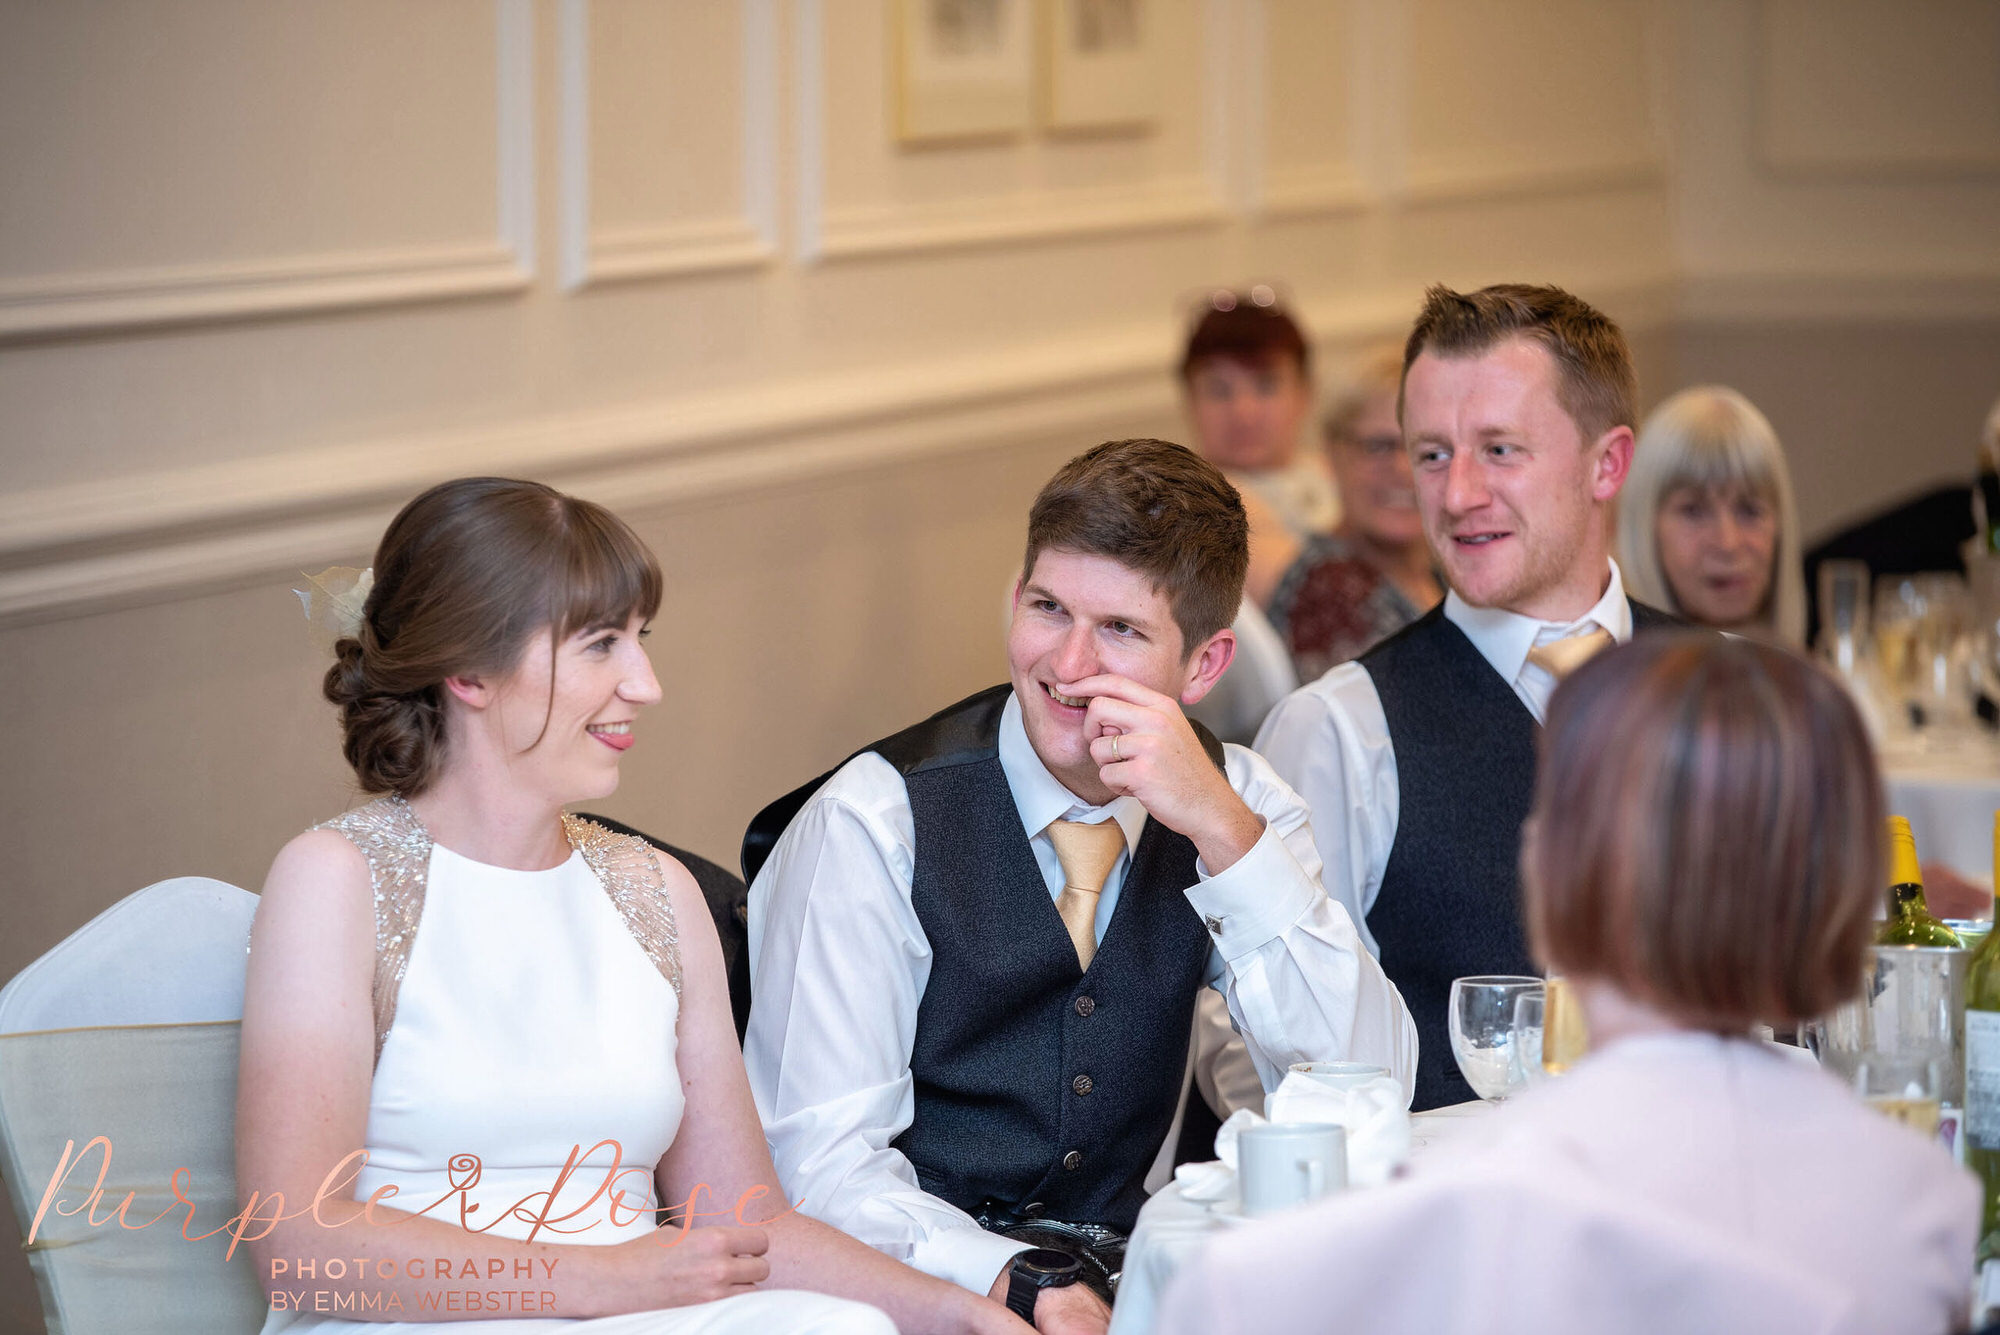 Groom laughing during speeches